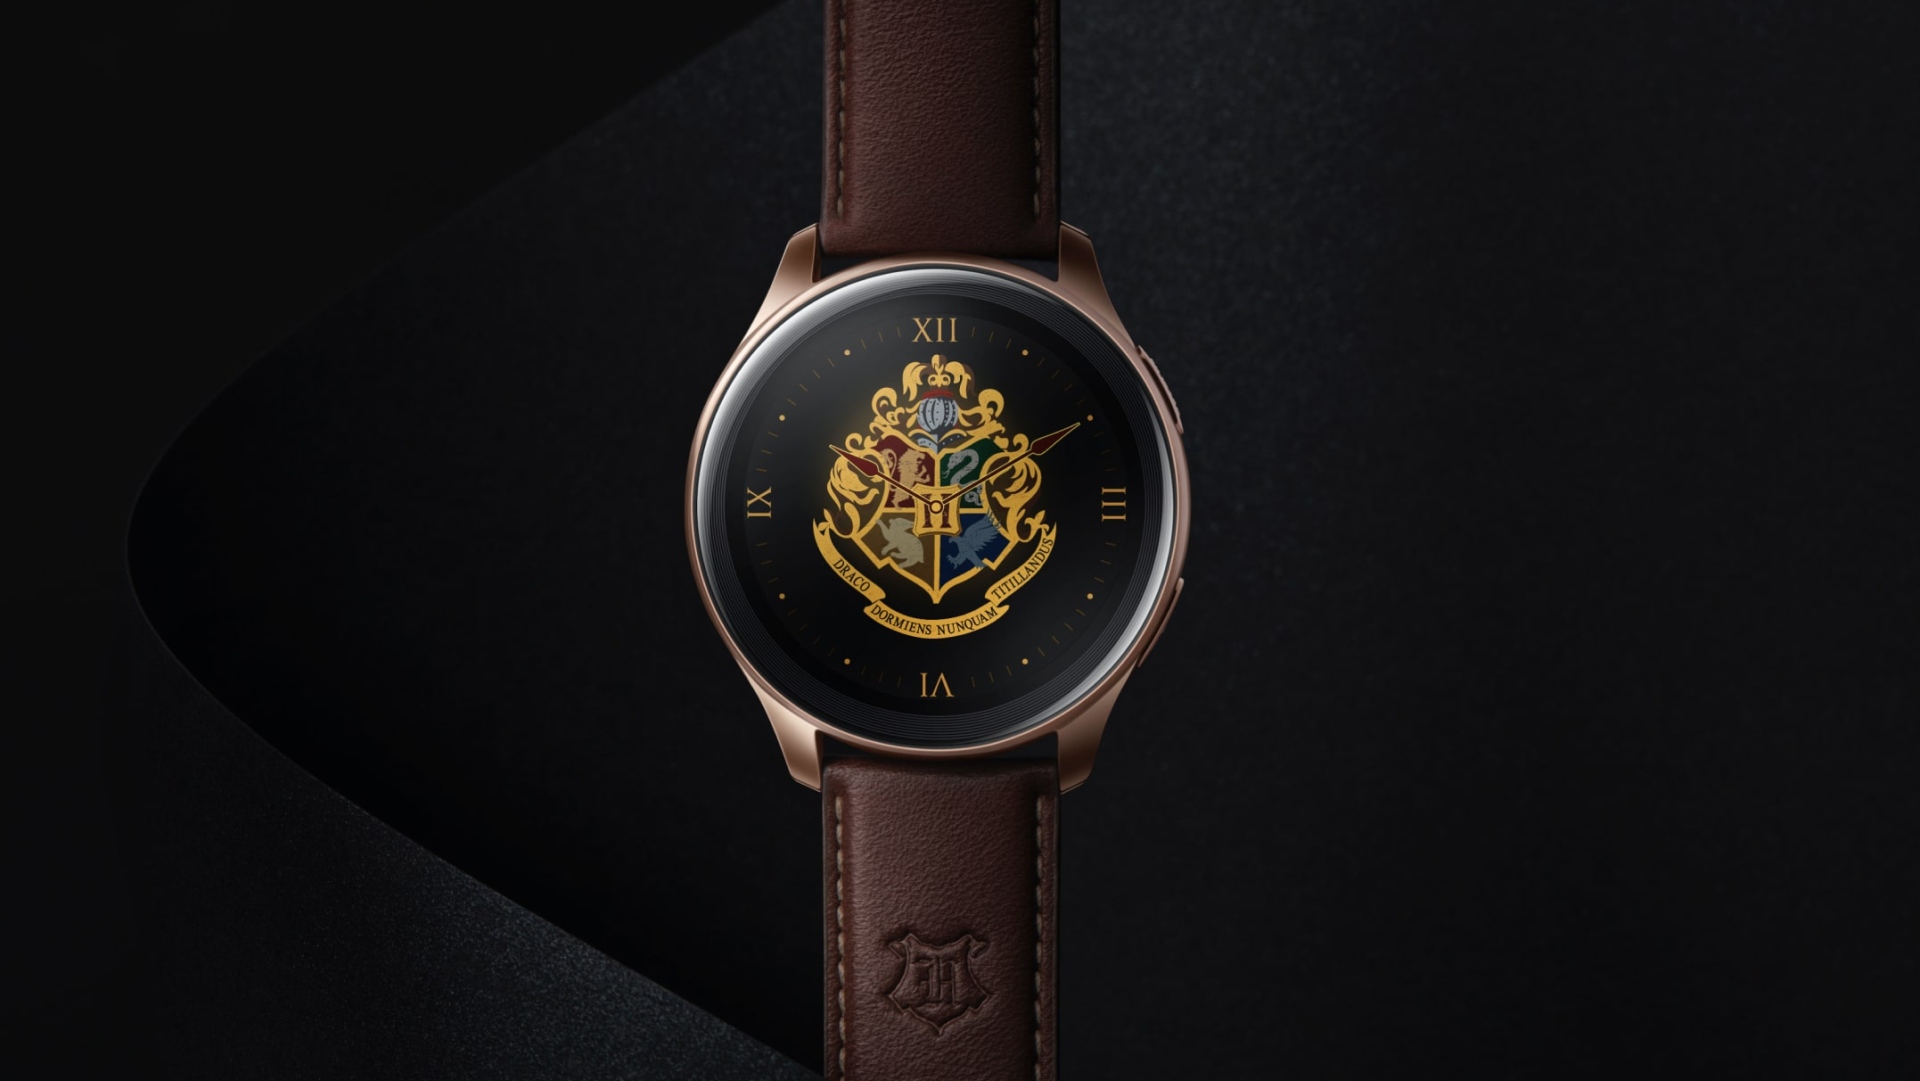 oneplus watch harry potter edition 1